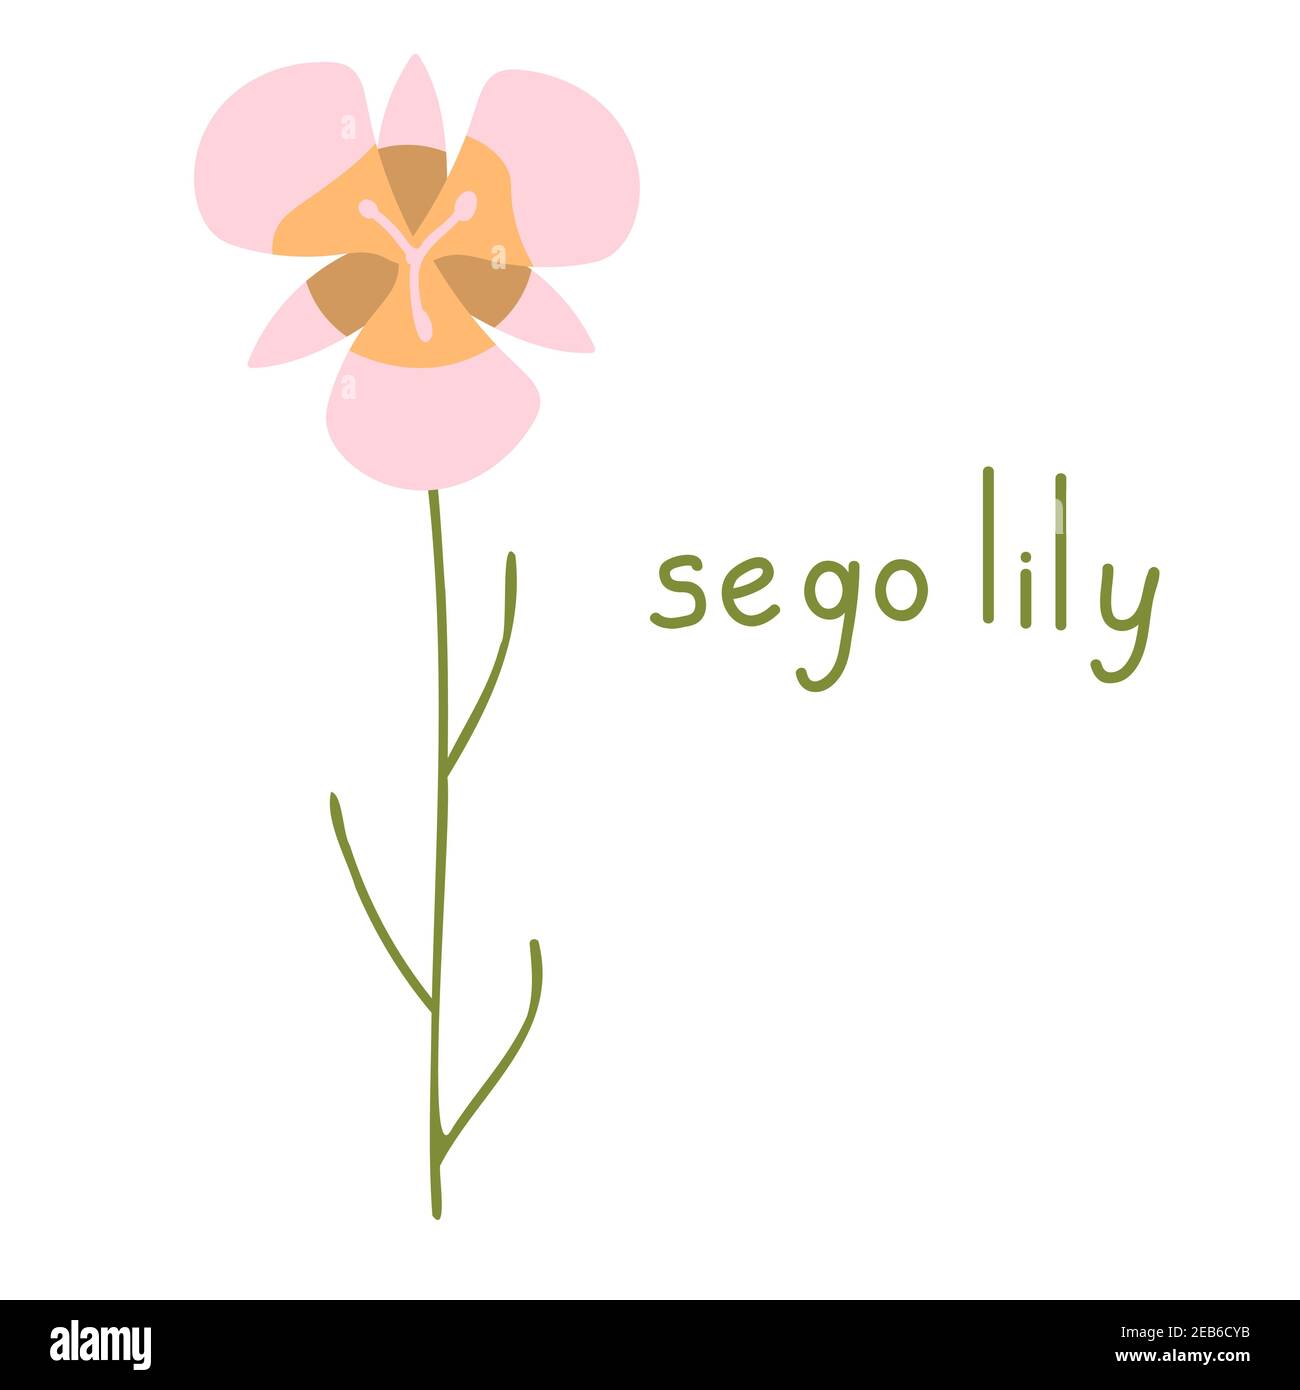 Sego lily vector flower isolated illustration Stock Vector